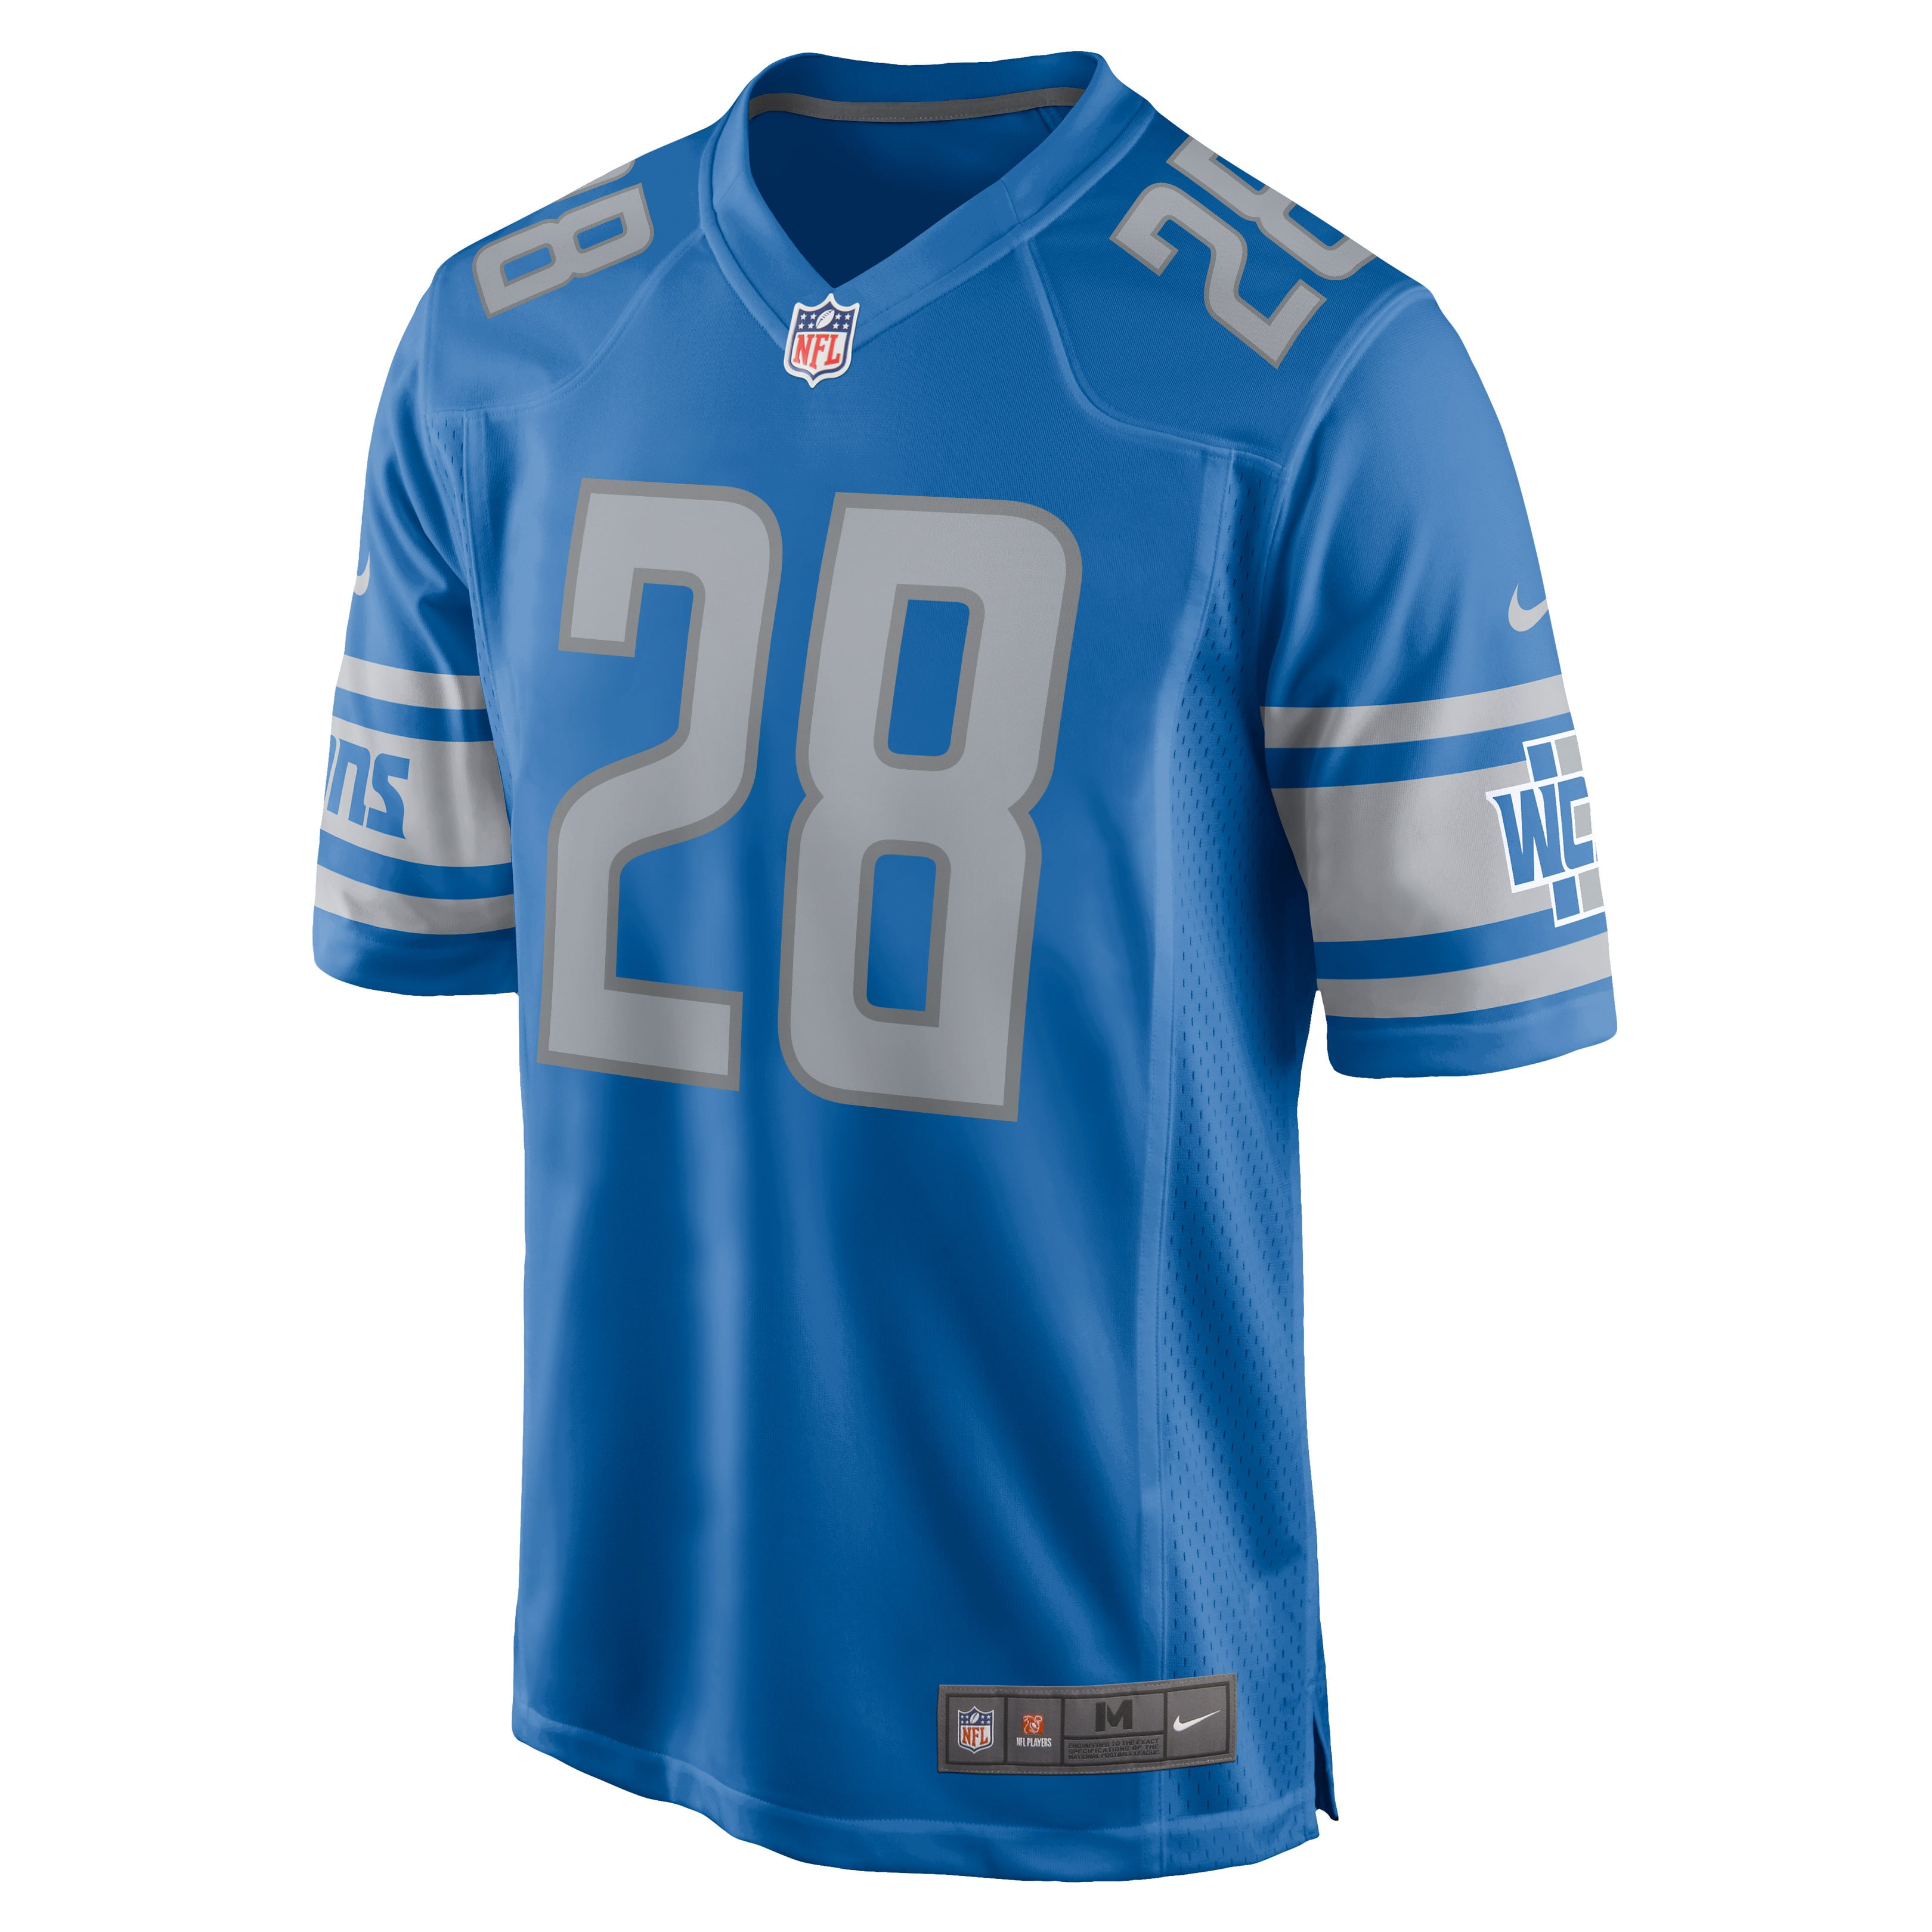 adrian peterson jersey lions